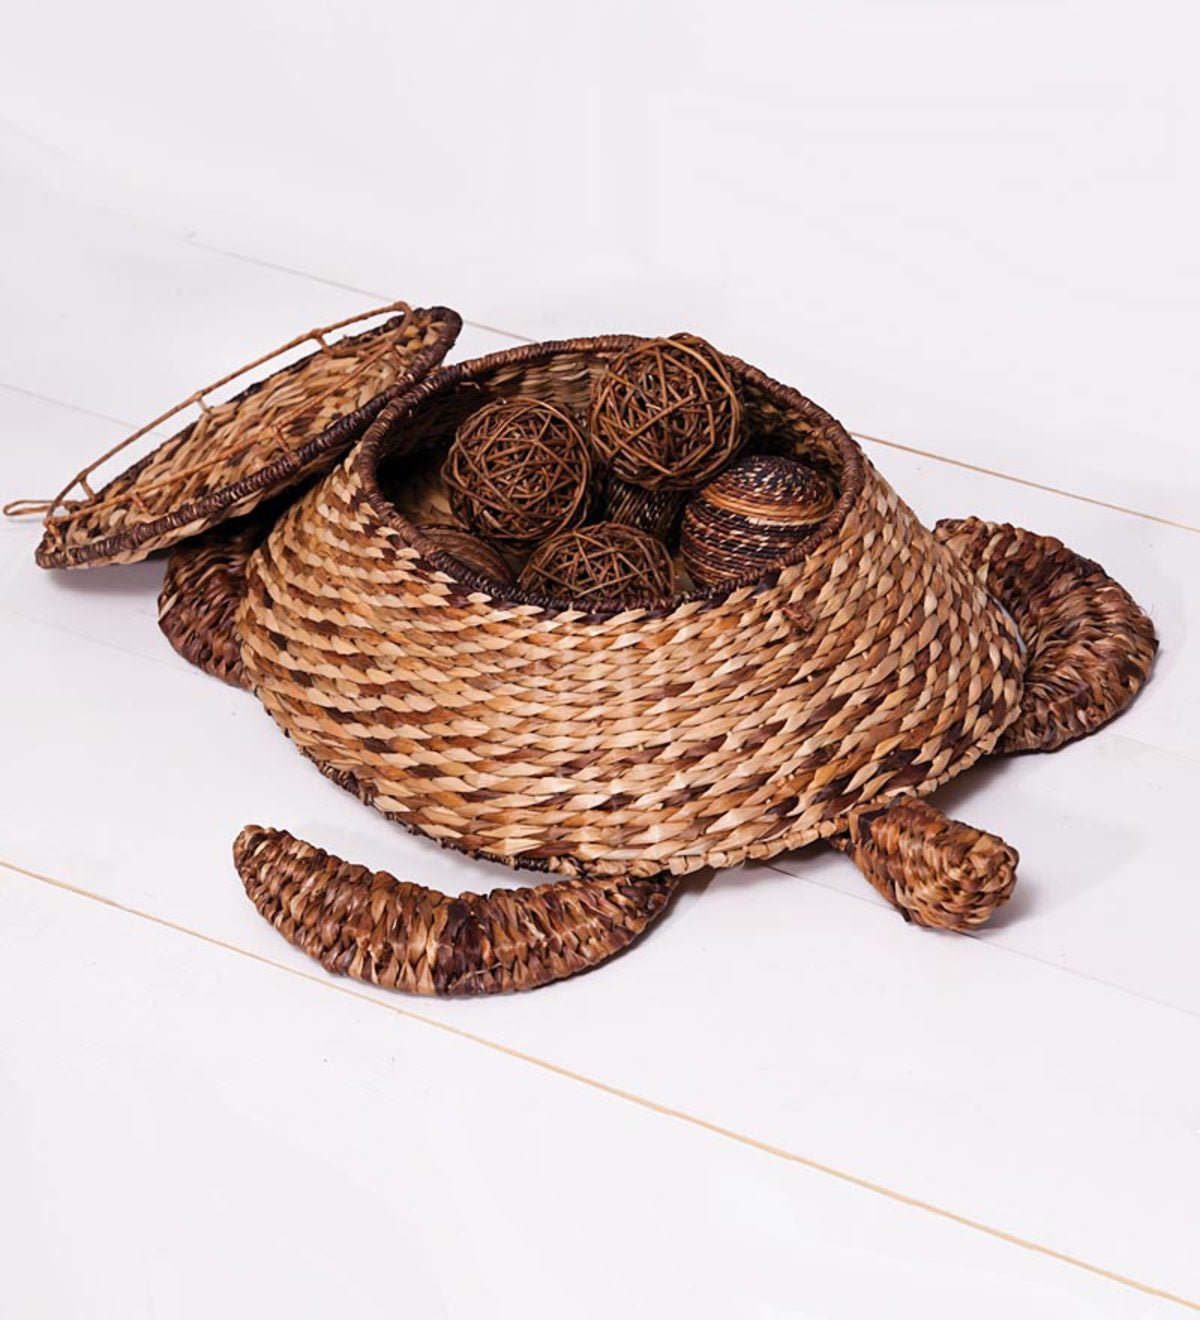 Woven Sea Turtle With Storage